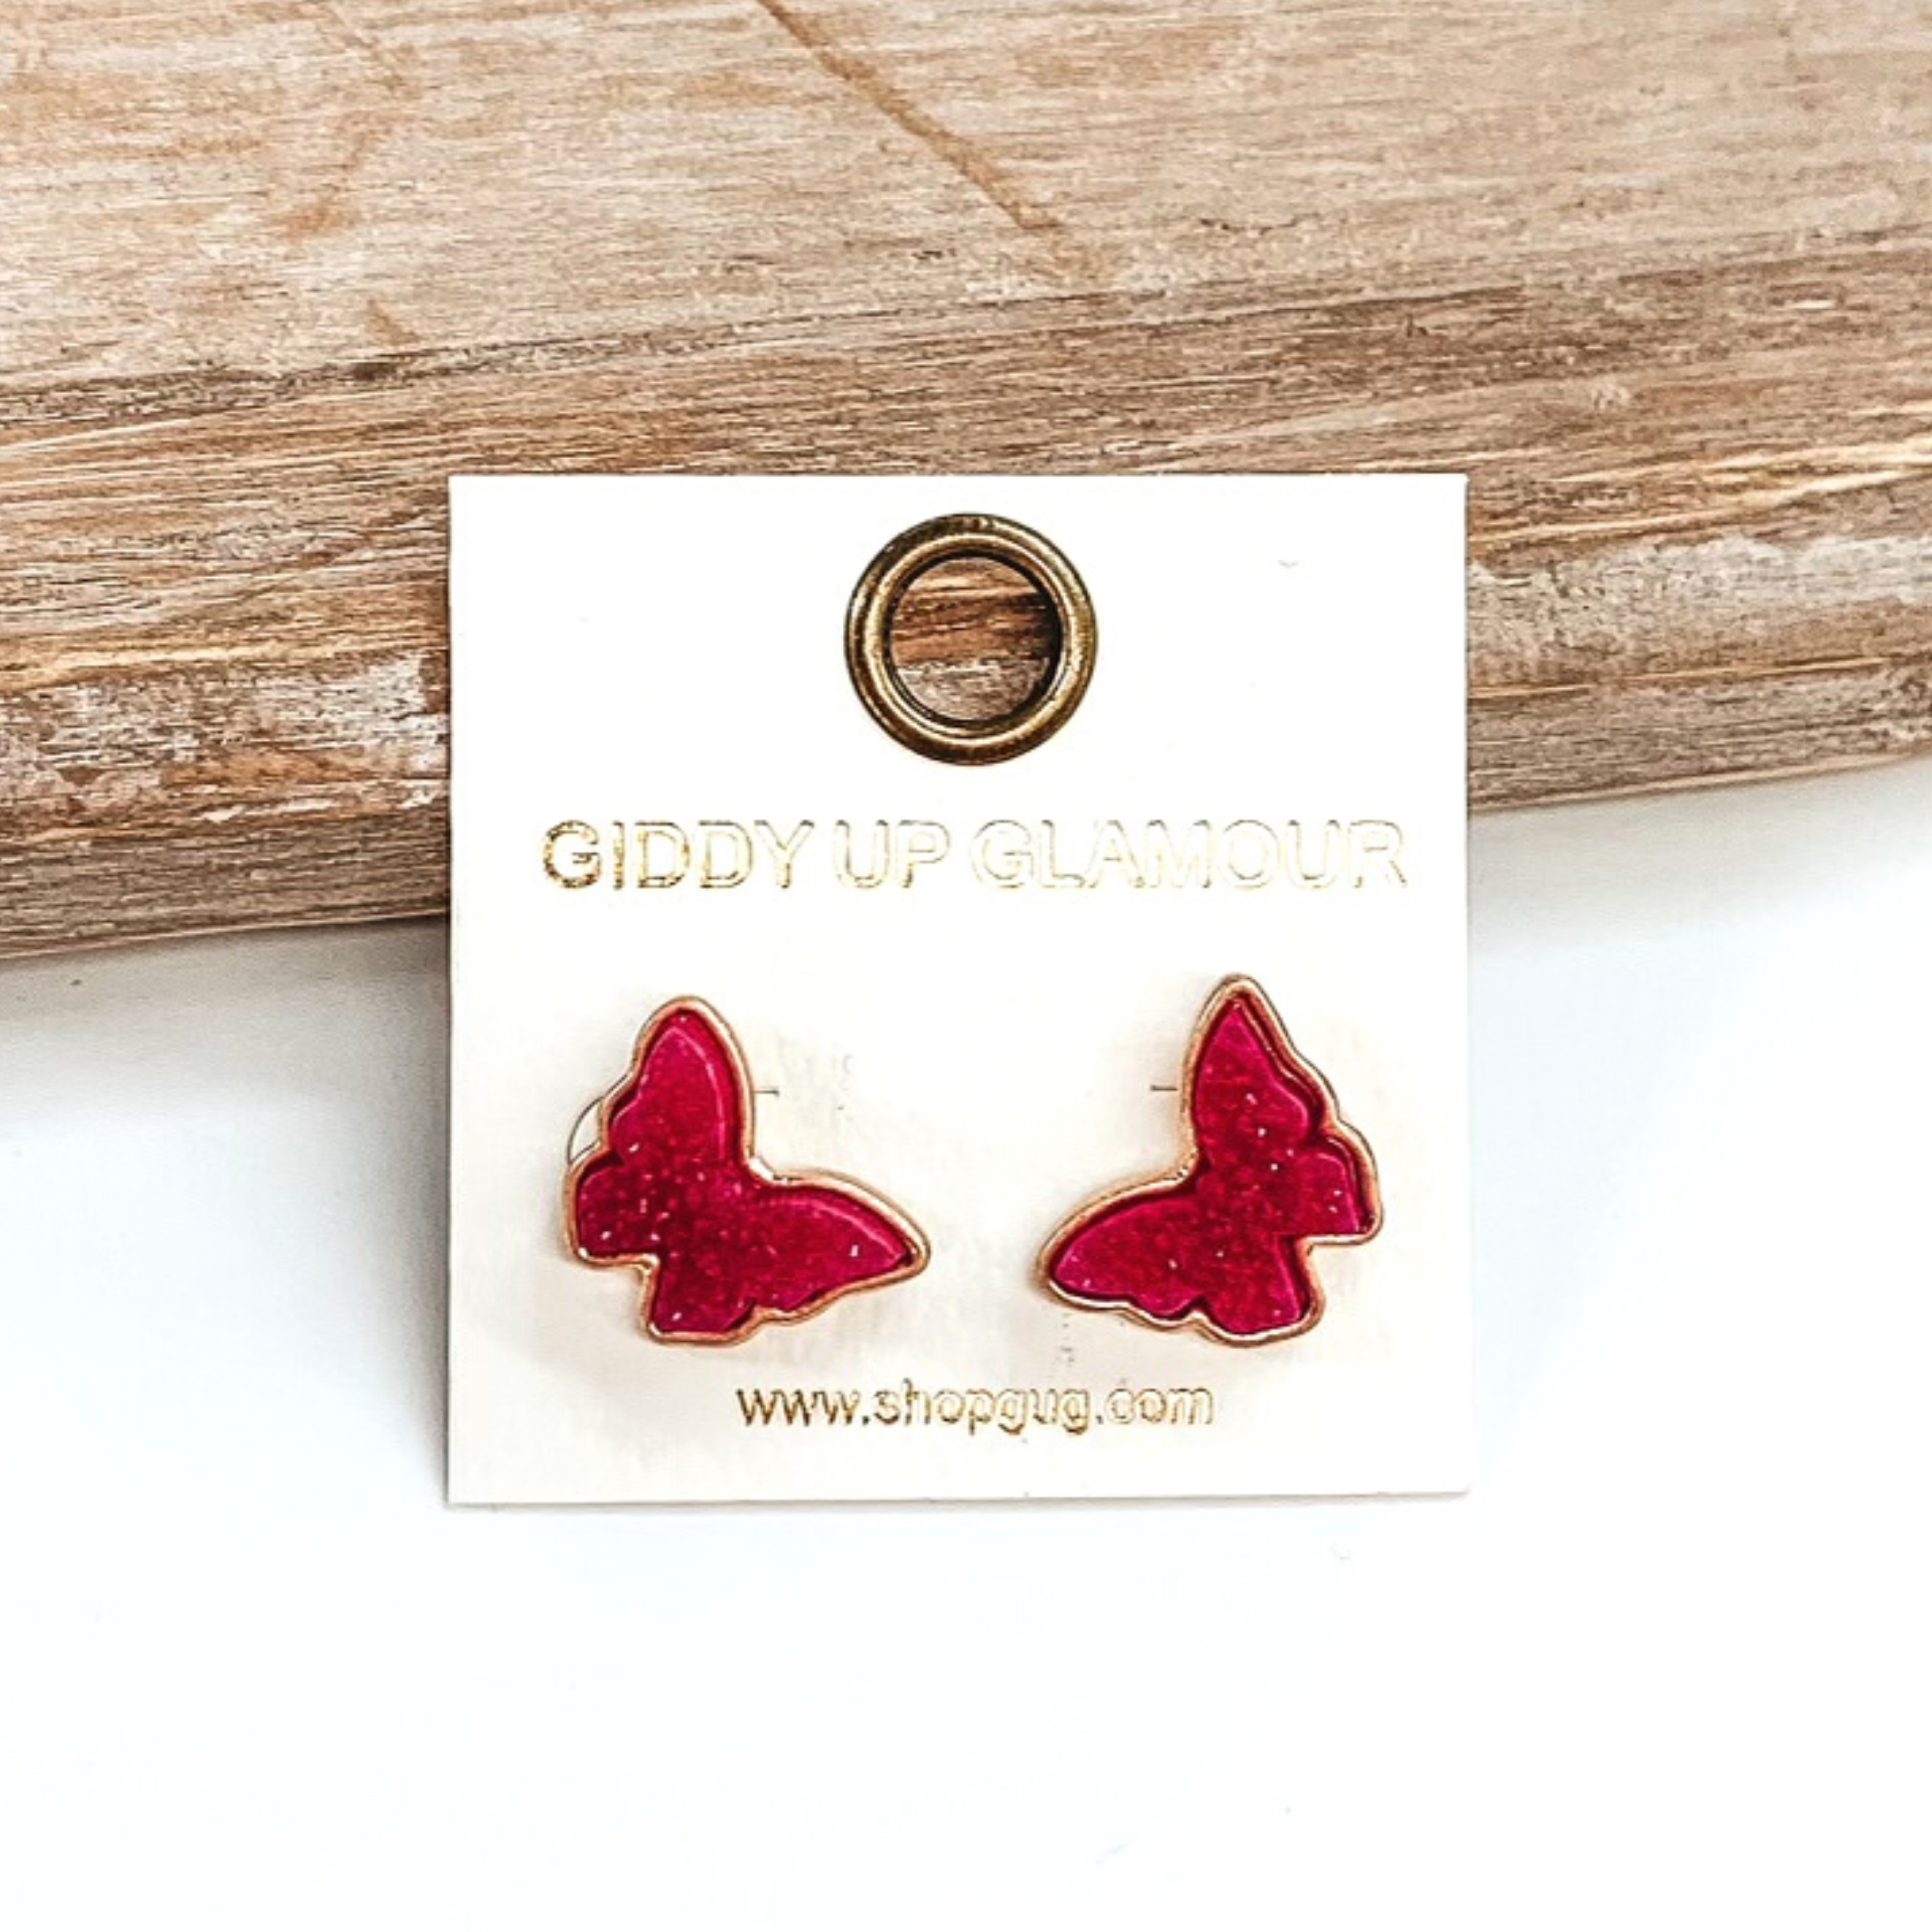 Gold post back earrings with druzy, fuchsia, butterfly shaped stone. These earrings are pictured on a white earrings holder on a white background, leaning against a tan block.